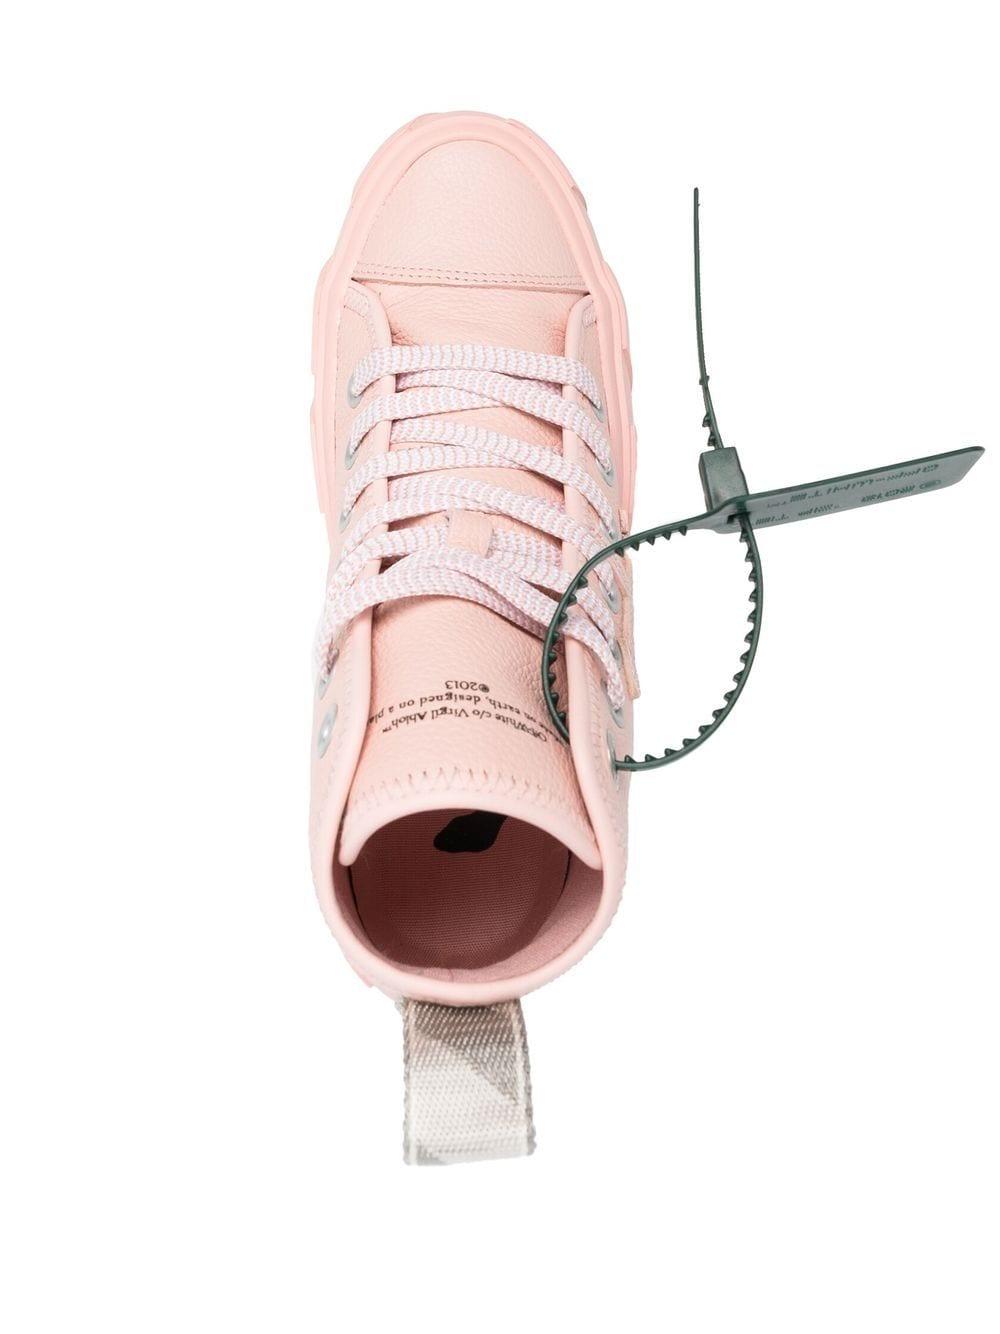 Off-White Virgil Abloh lace-up Sneakers - Farfetch